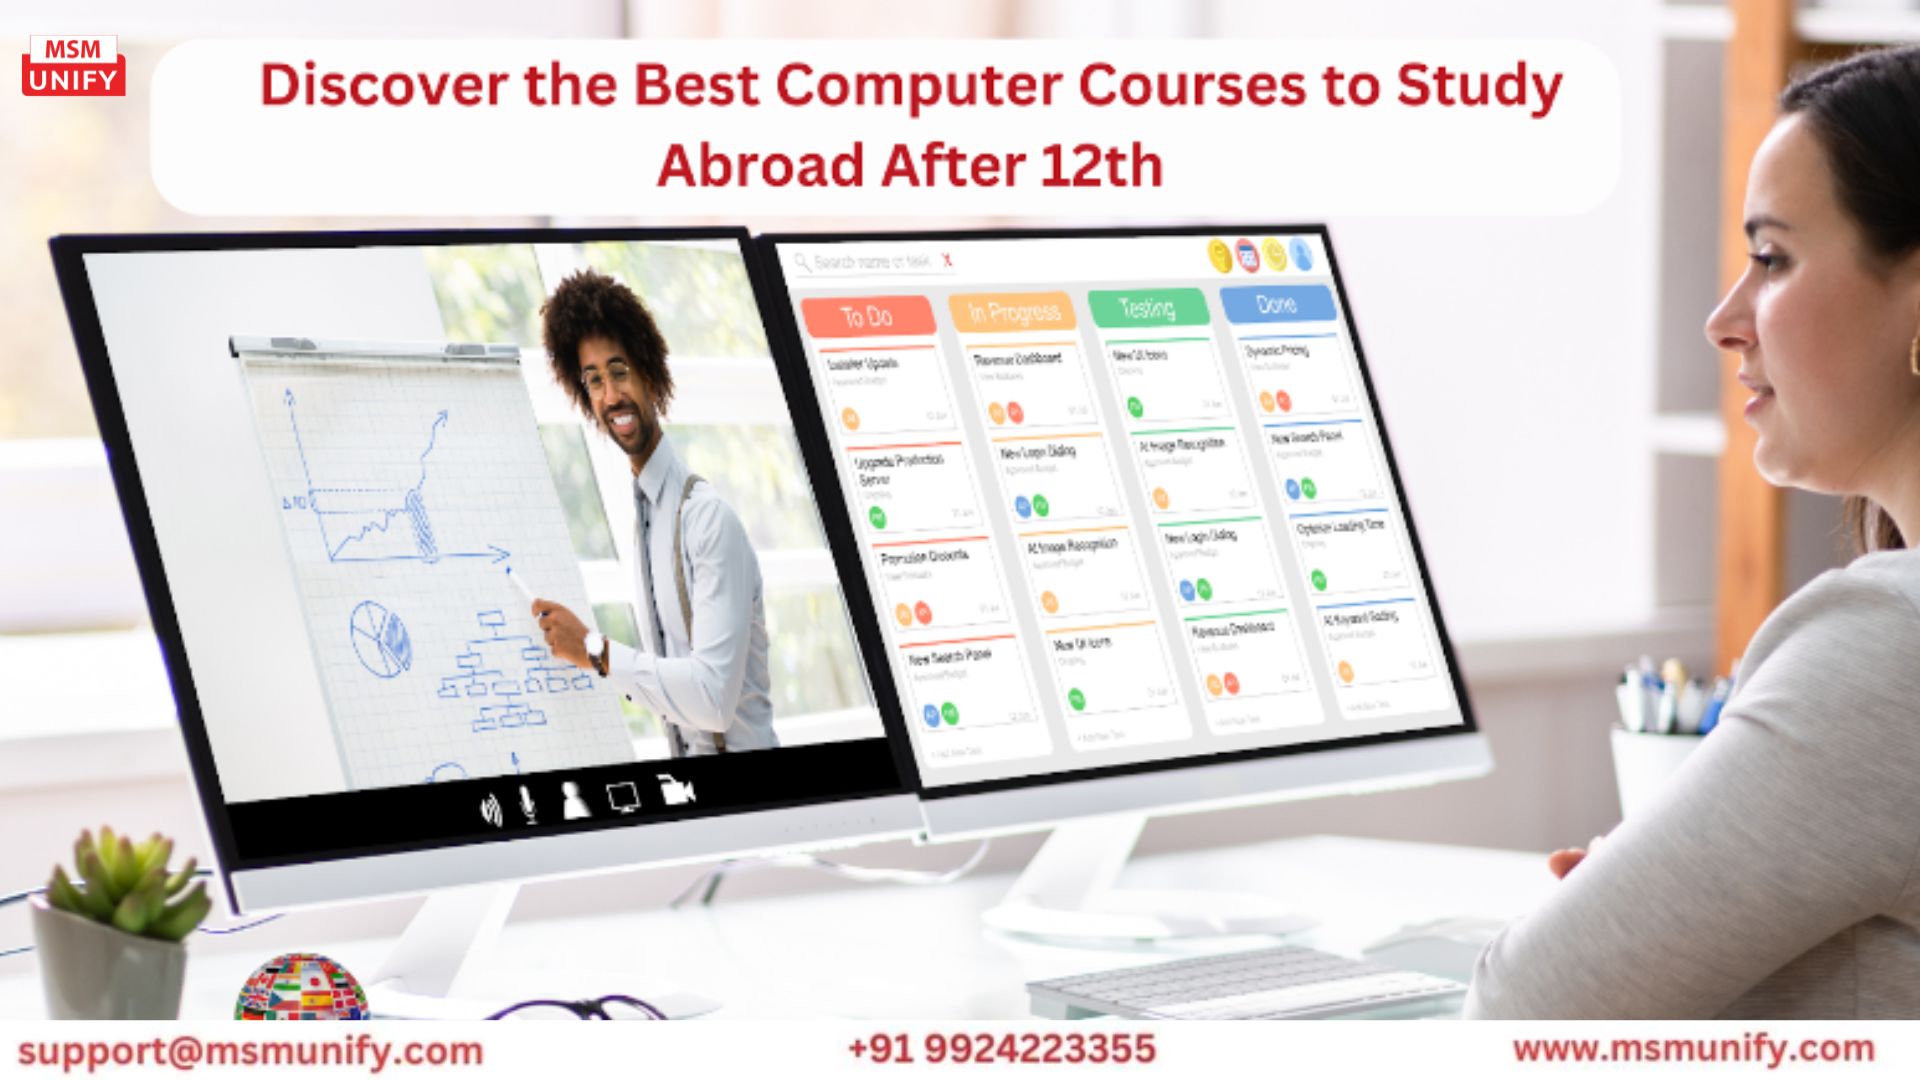 Explore the best <a href="https://www.msmunify.com/blogs/computer-courses-after-12th-to-study-abroad/">computer courses after 12th</a>to study abroad. Navigate your educational journey with cutting-edge programs designed for international students. From programming to data science, discover opportunities to shape your future in the dynamic world of technology.
